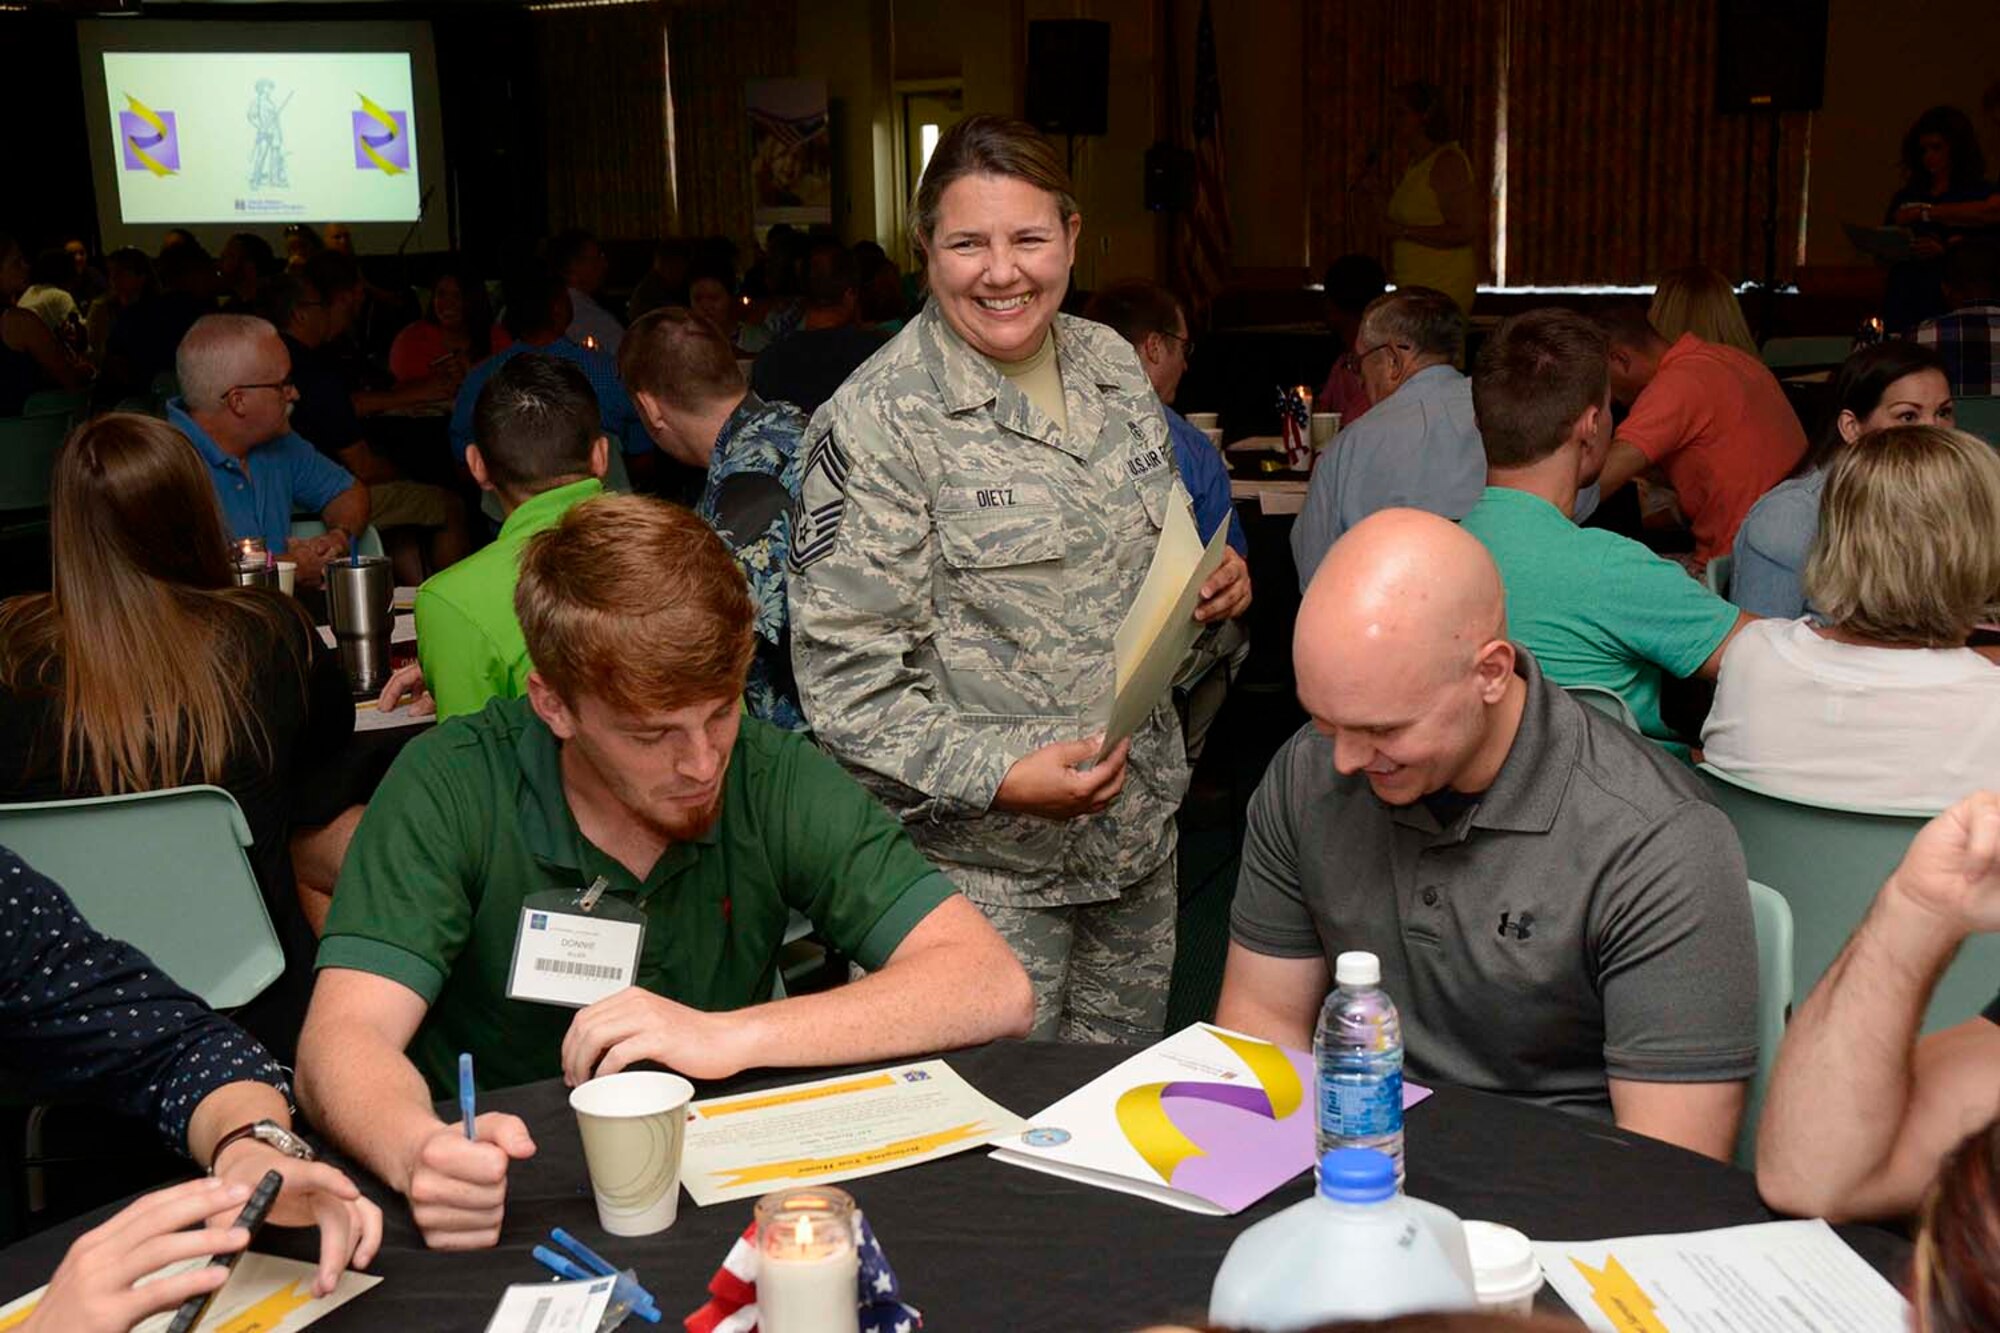 U.S. Air Force Chief Master Sgt. Susan Dietz, 145th Medical Group, passes out certificates during a Yellow Ribbon event, held at Lake Junaluska, N.C., June 26, 2016. There were 179 participants including 77 service members. The North Carolina Air National Guard’s Yellow Ribbon Program serves as a series of stepping stones to help reunite families and reacclimatize Airmen and Soldiers back to the civilian world after deployments. Events are held 30 days prior to a deploying unit and then at 30, 60, and 90 day intervals following the member’s return. (U.S. Air National Guard photo by Master Sgt. Patricia F. Moran/Released)